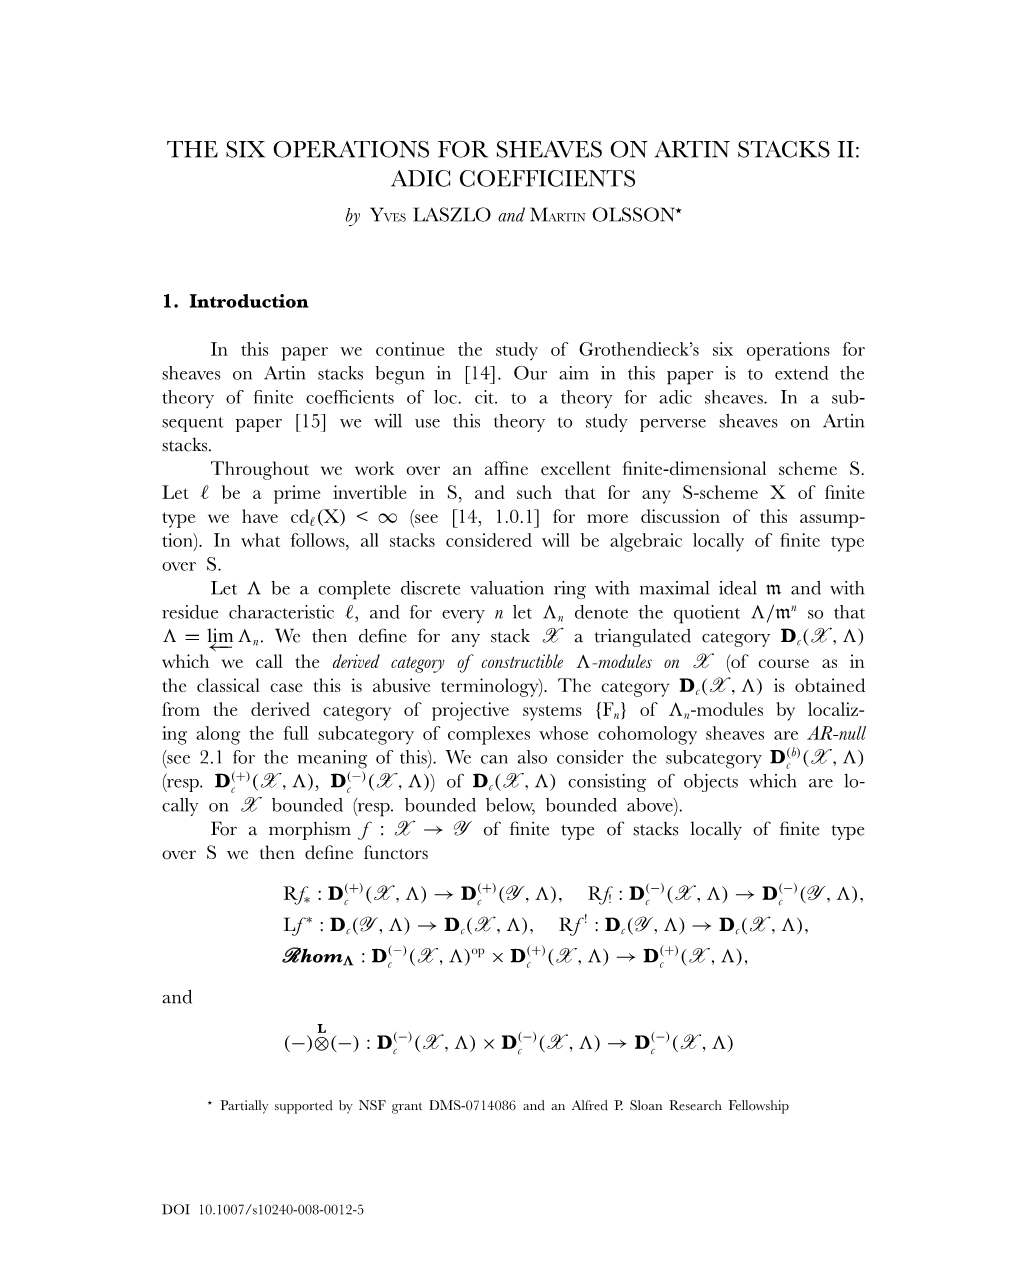 THE SIX OPERATIONS for SHEAVES on ARTIN STACKS II: ADIC COEFFICIENTS � by YVES LASZLO and MARTIN OLSSON